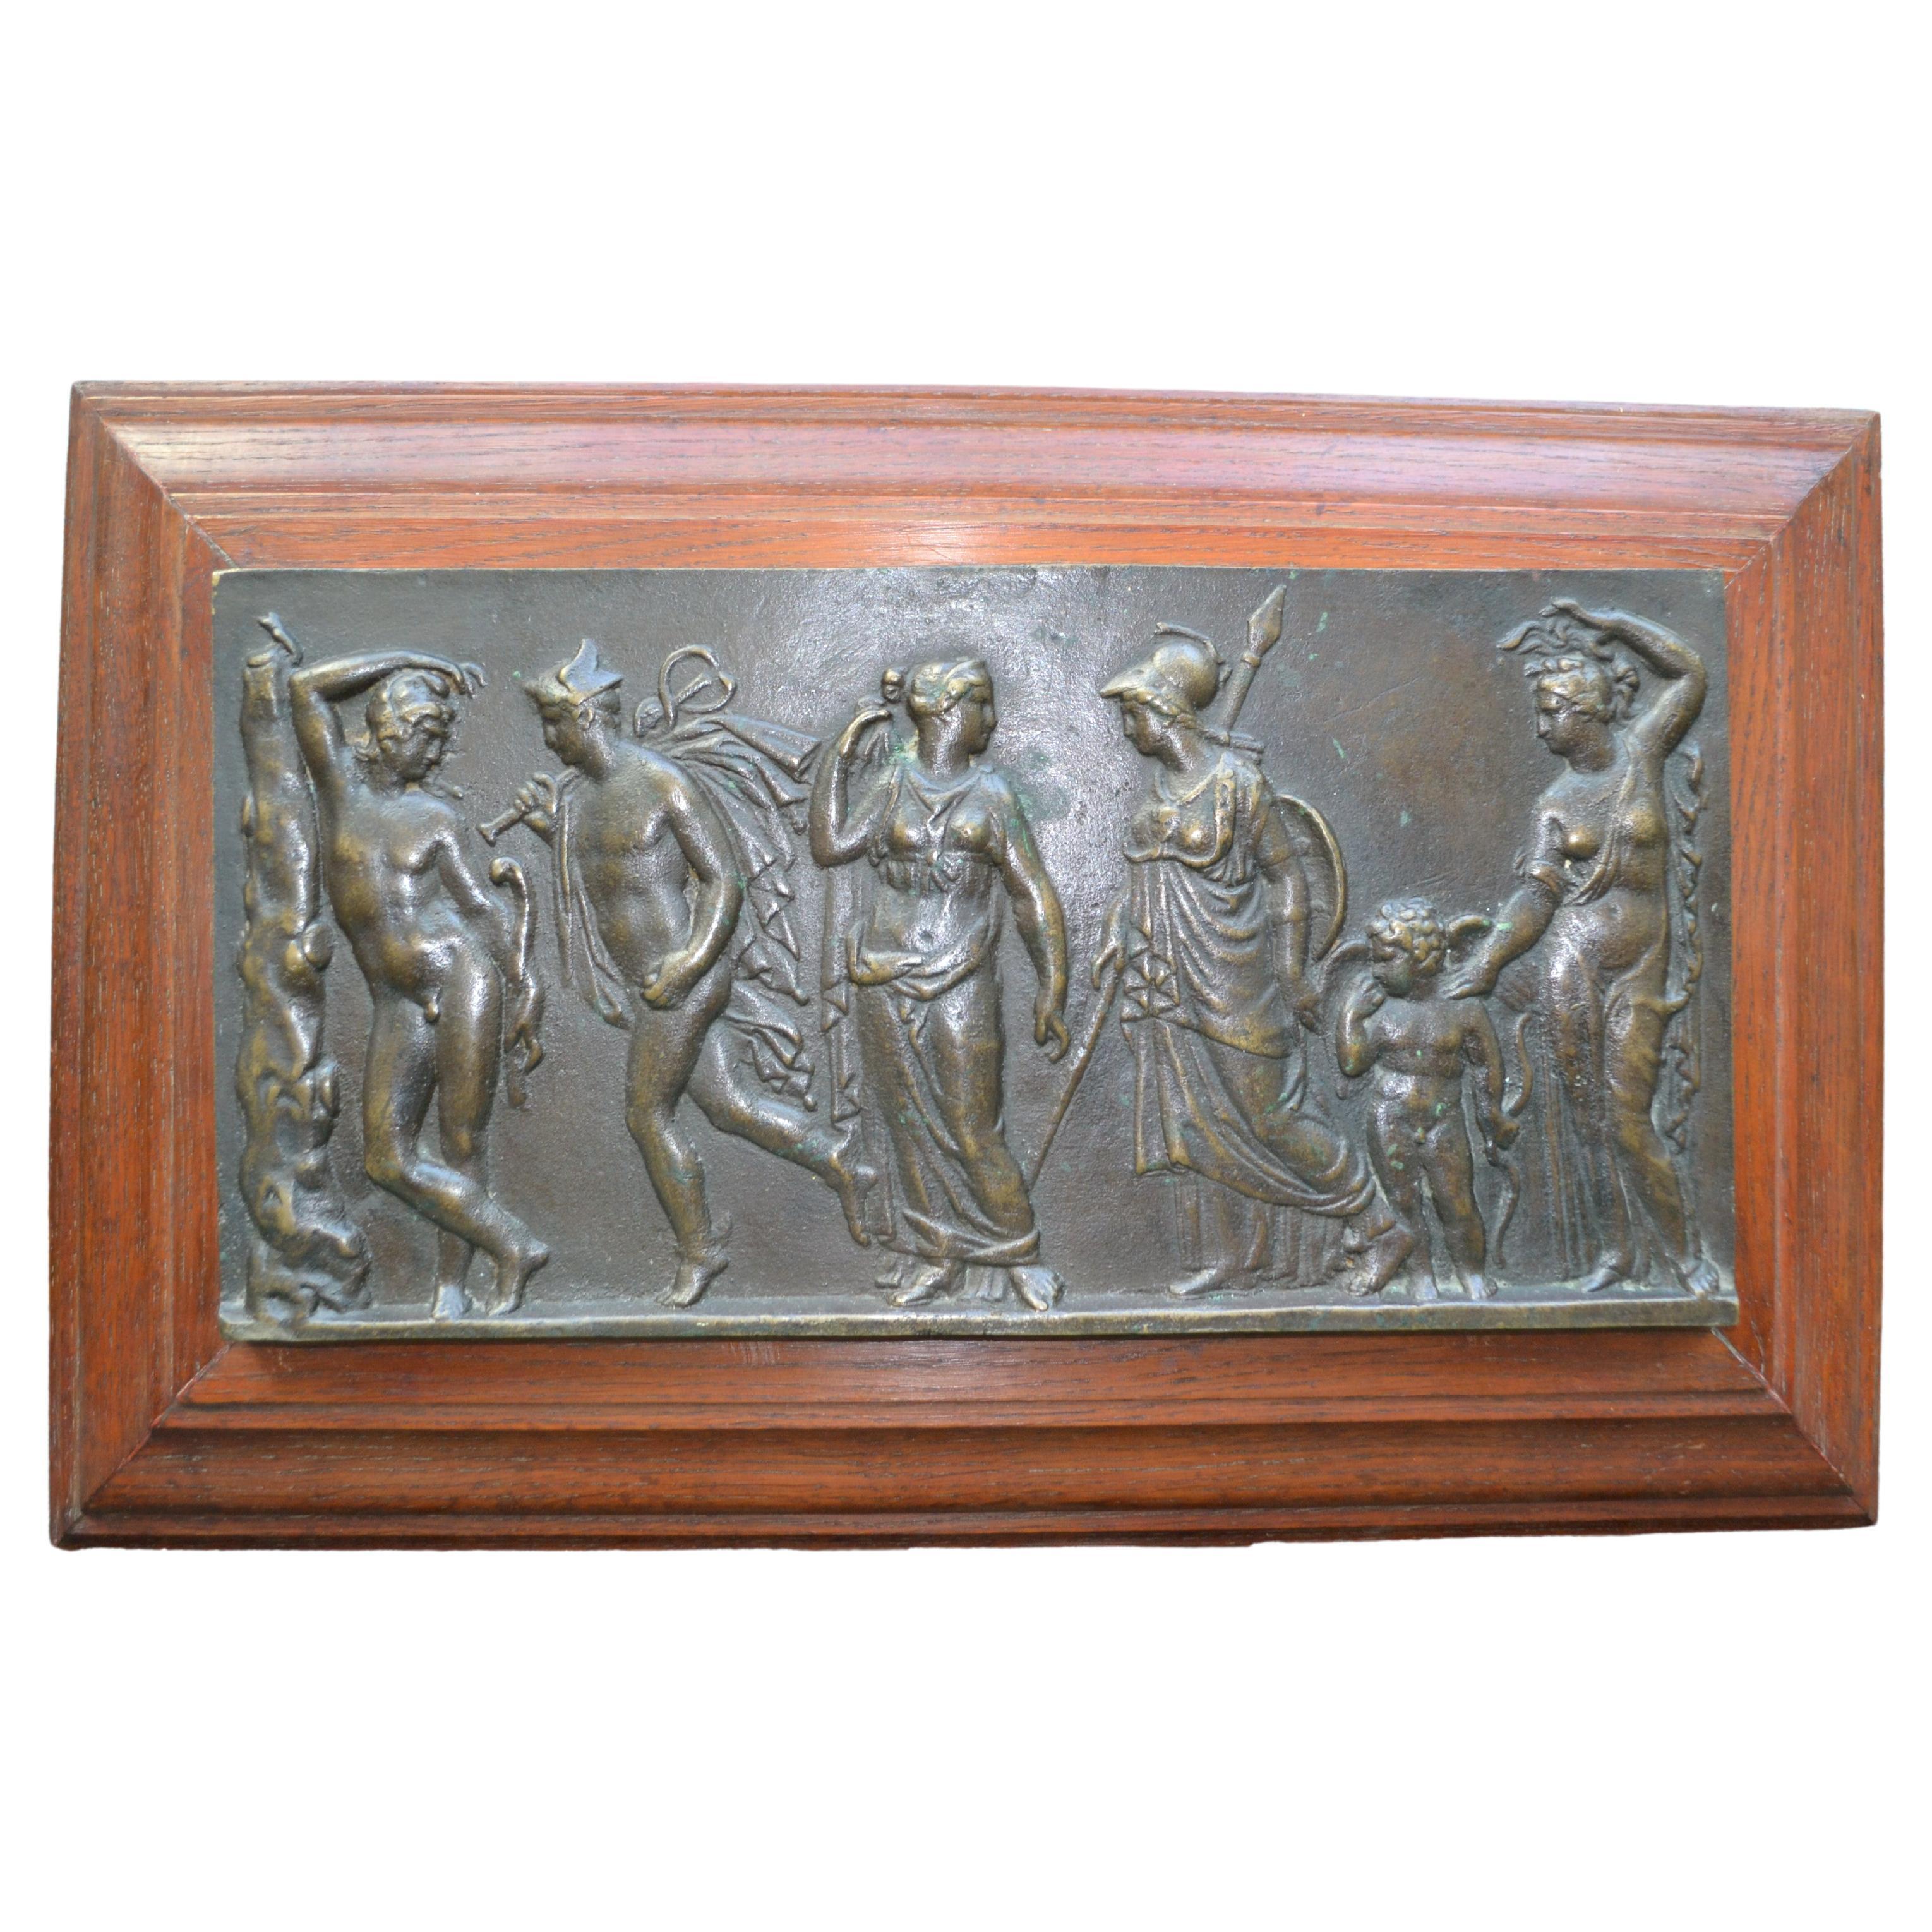 A Grand Tour heavy bronze bas-relief of a classical scene showing a retinue of six figures consisting of two nude standing males and three classically draped maidens including Athena wearing her characteristic Corinthian Helmet . In between Athena 